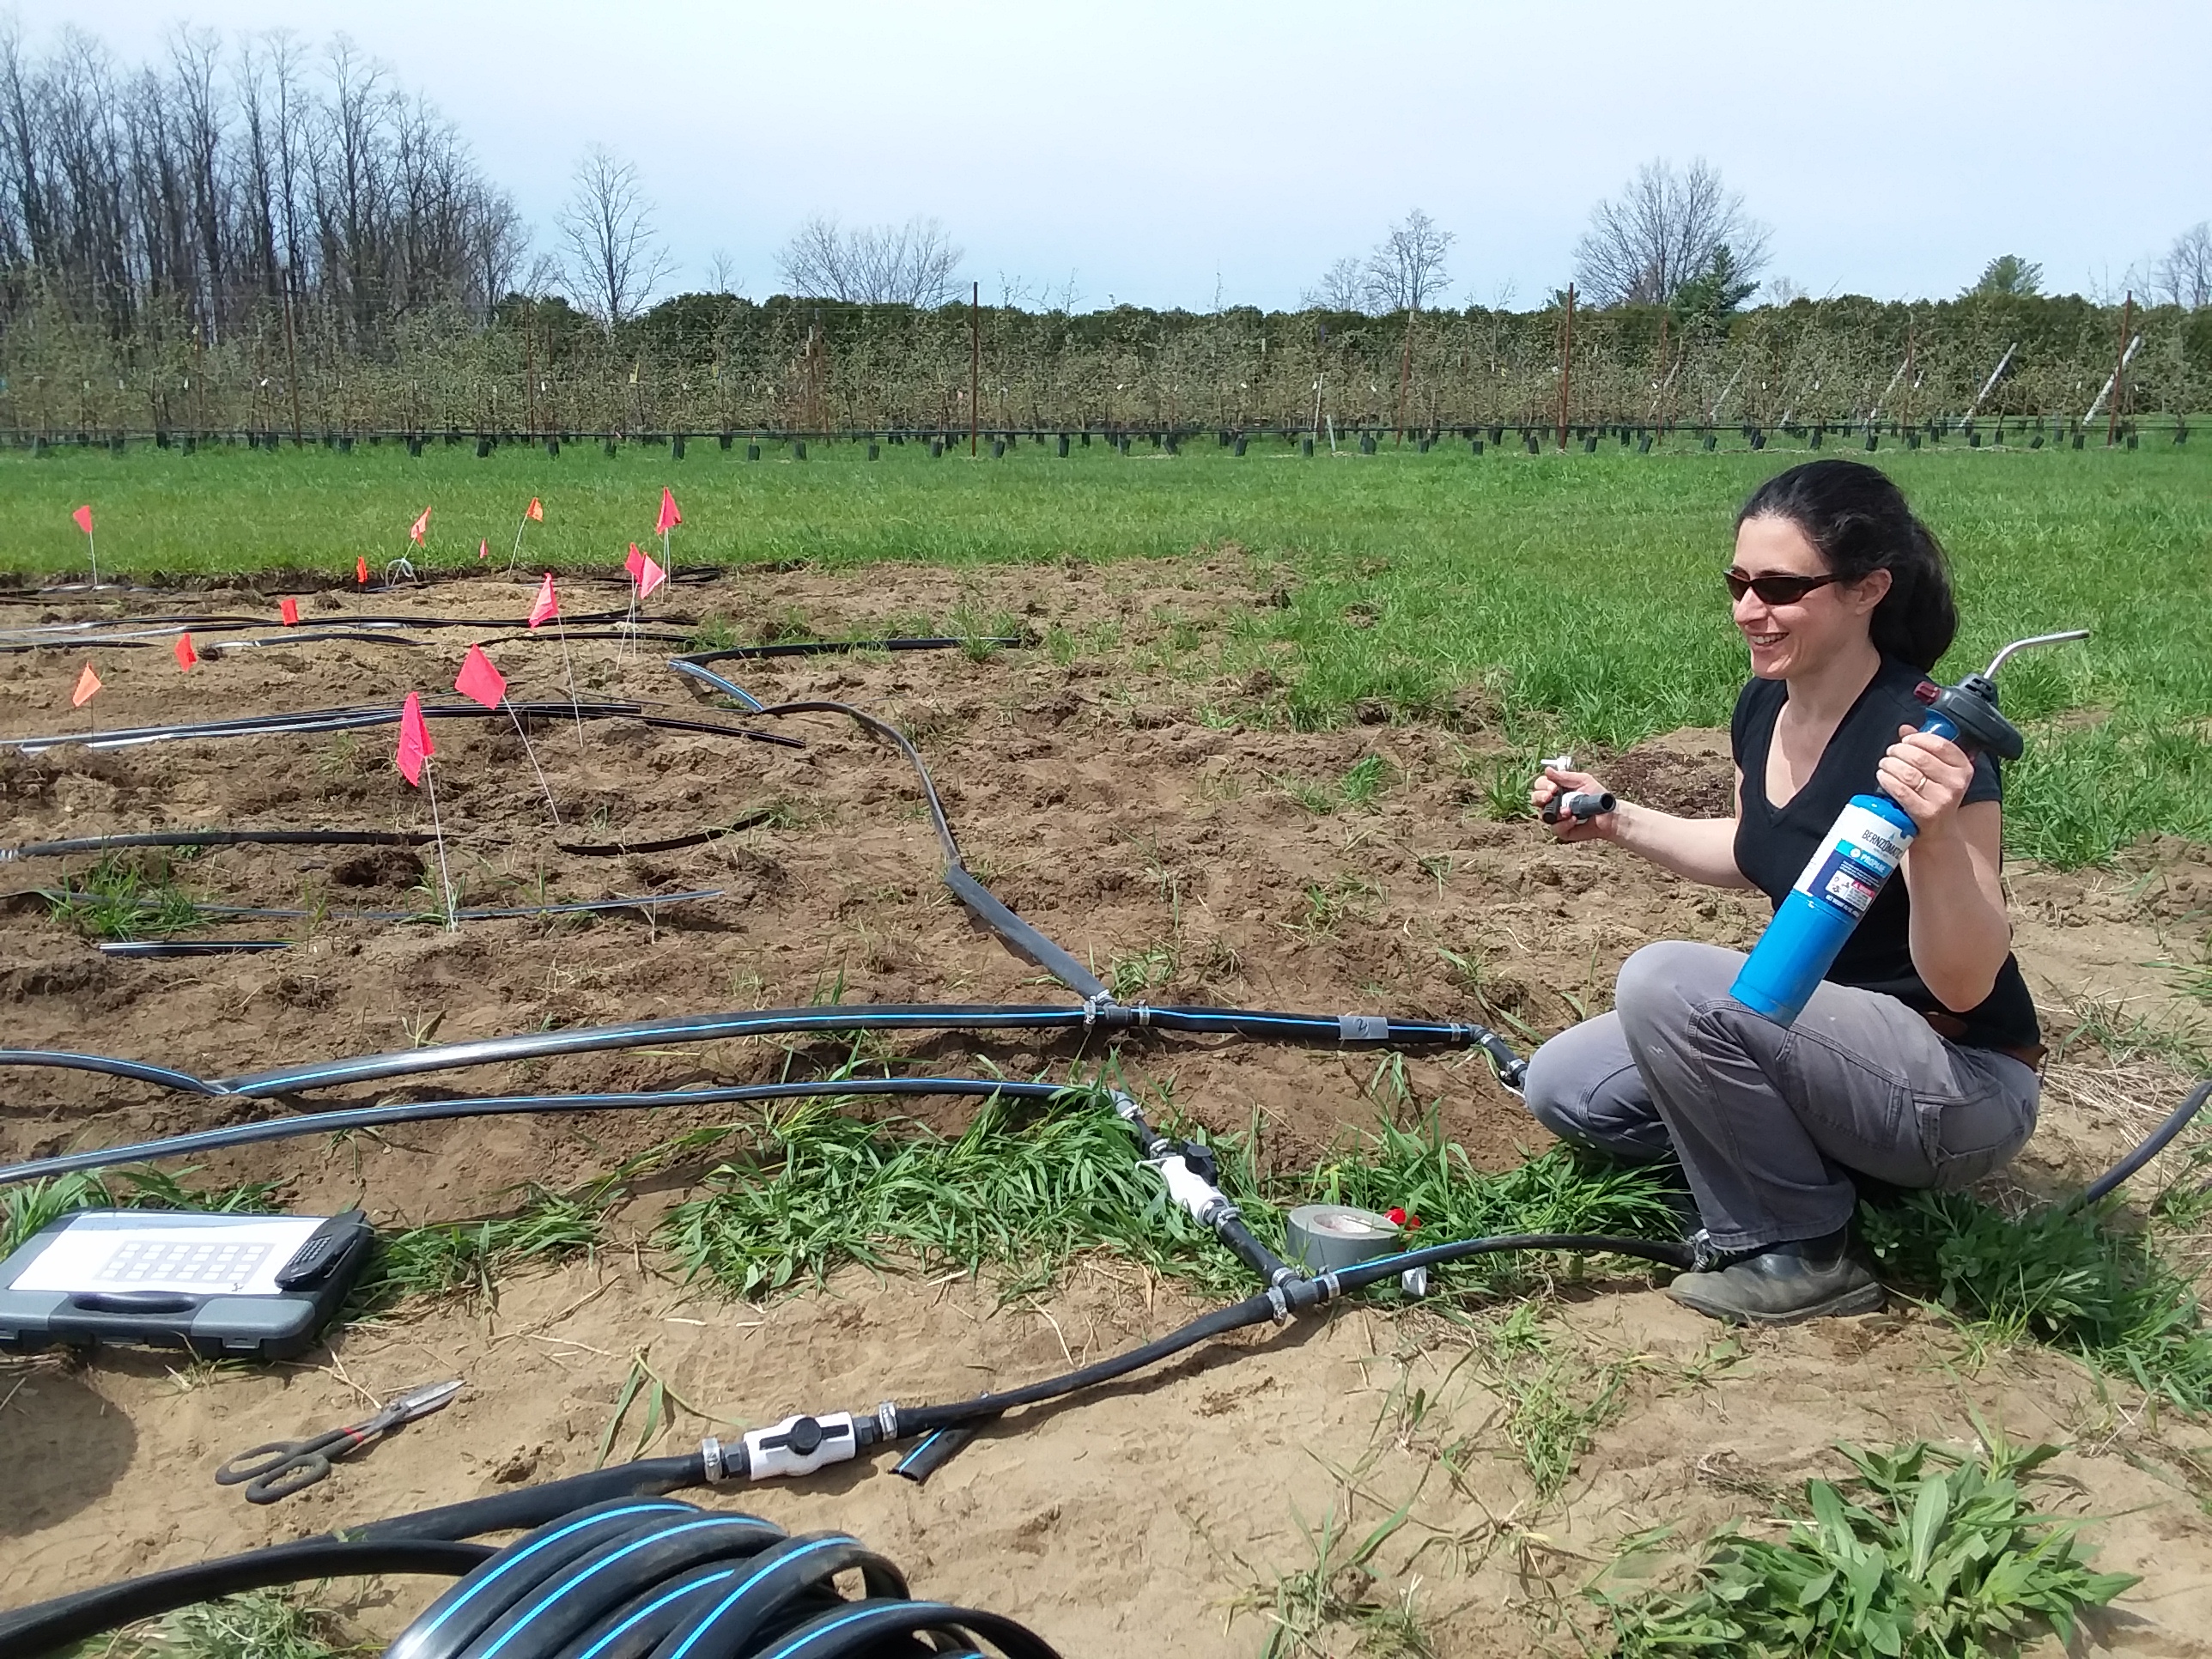 Dr. Schattman setting up irrigation research plots in Vermont